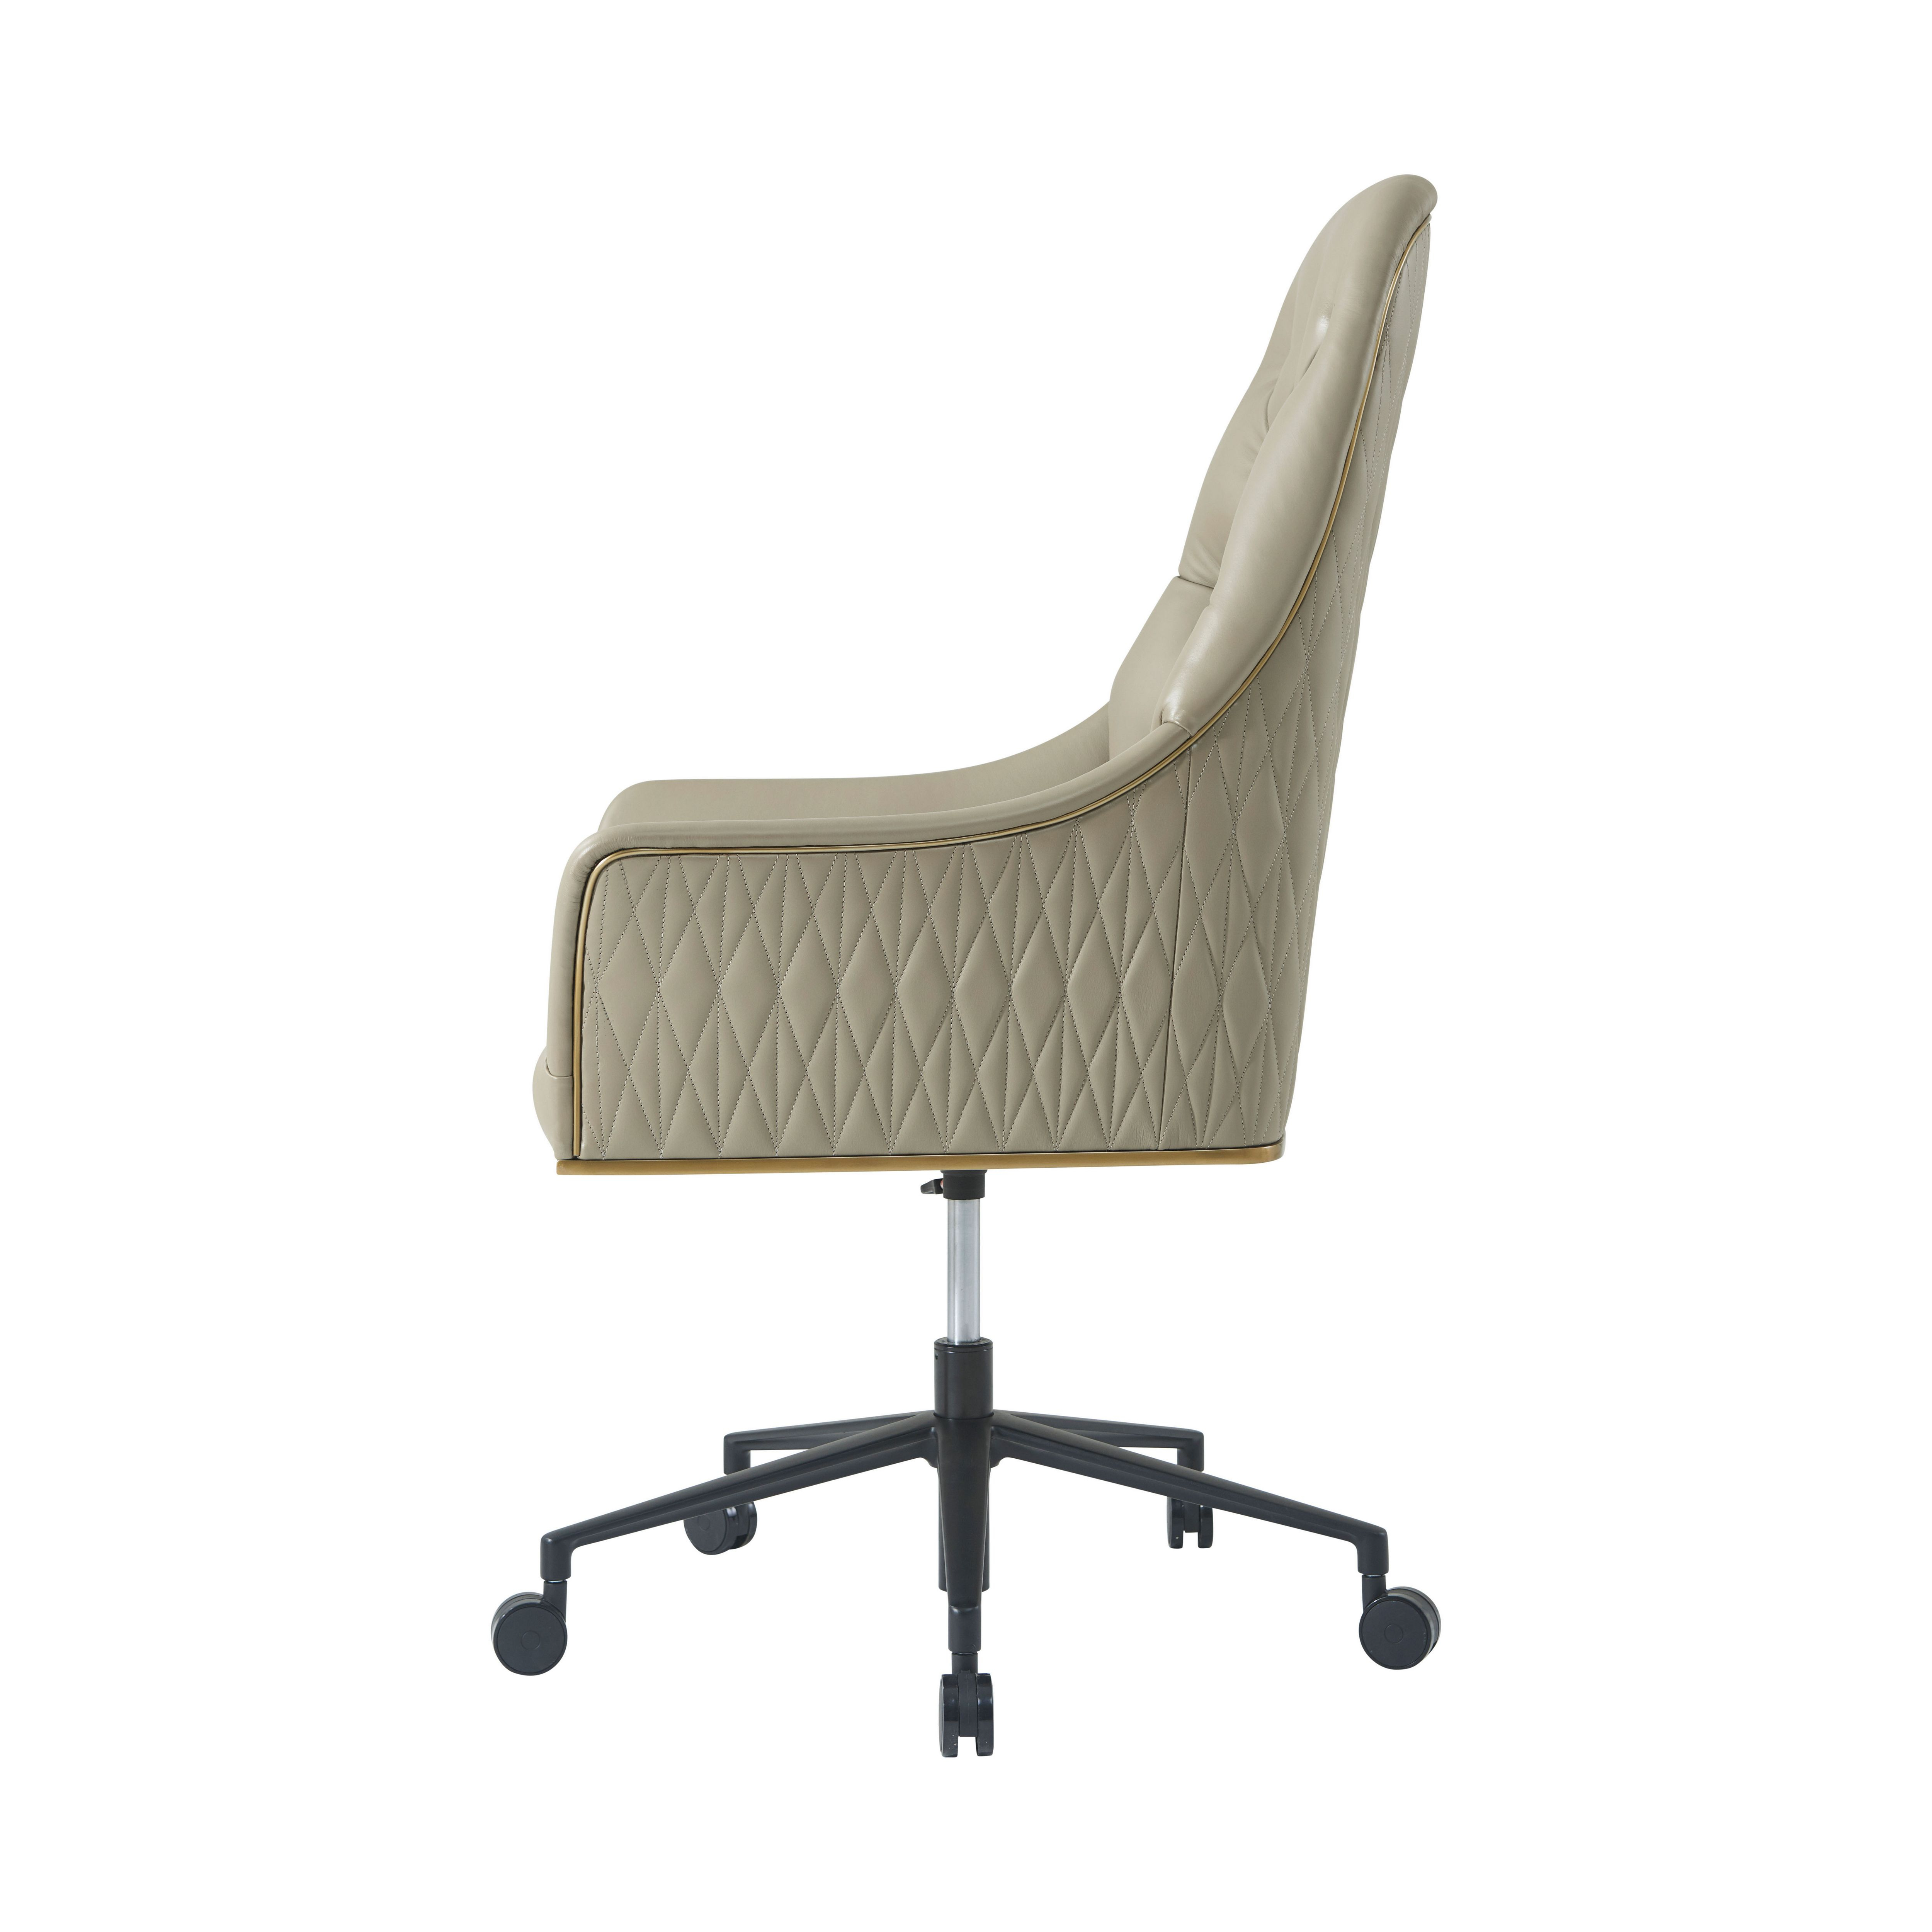 ICONIC OFFICE CHAIR